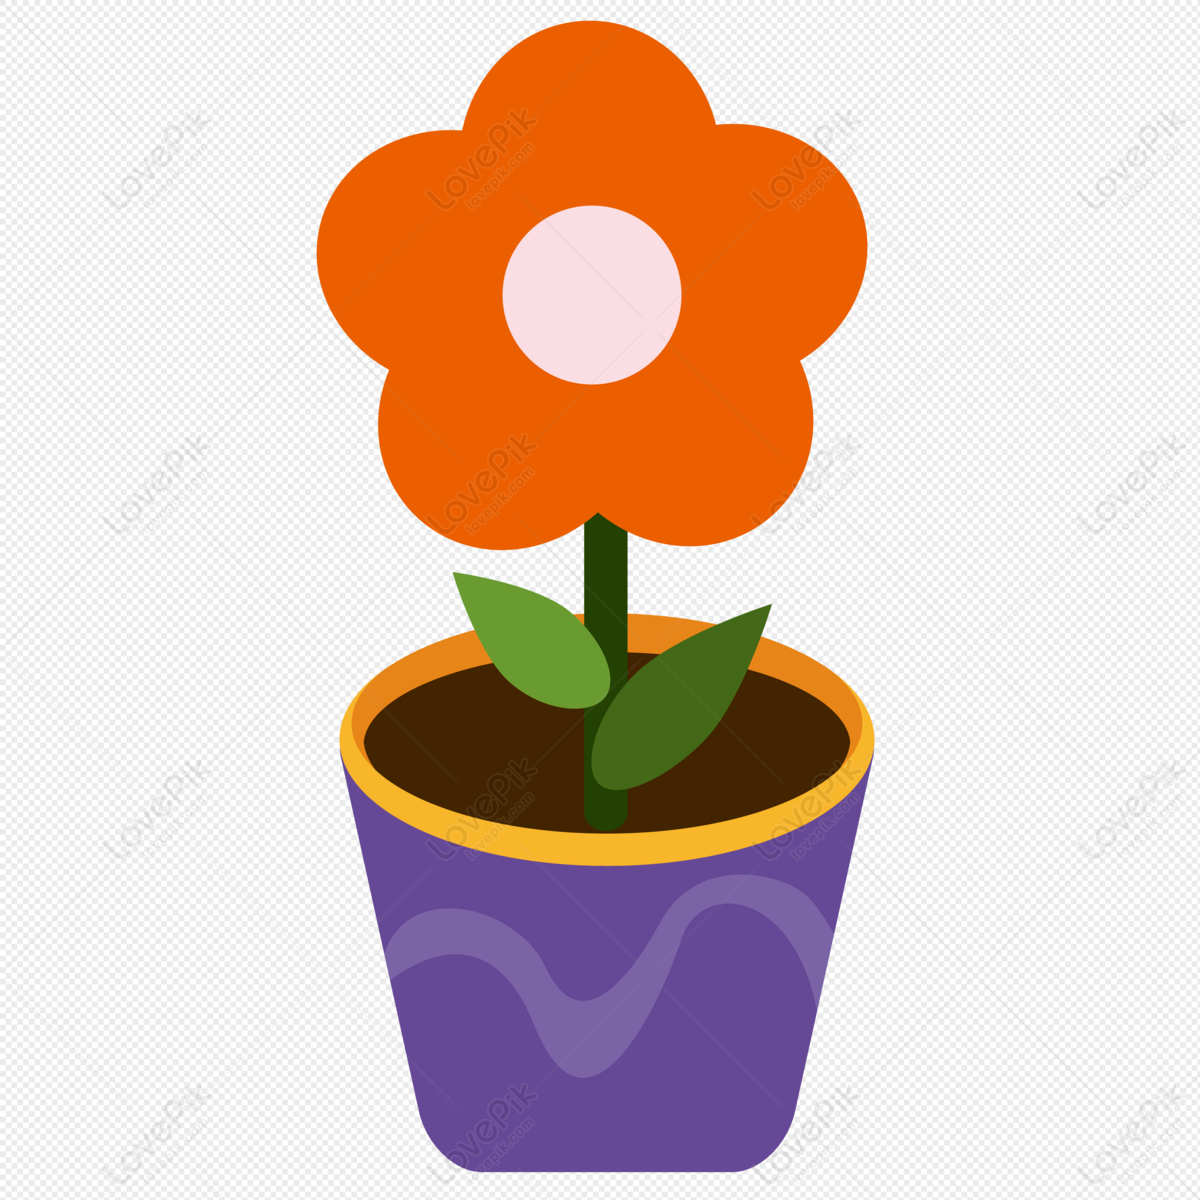 Flower Pot PNG Image Free Download And Clipart Image For Free Download -  Lovepik | 401345611